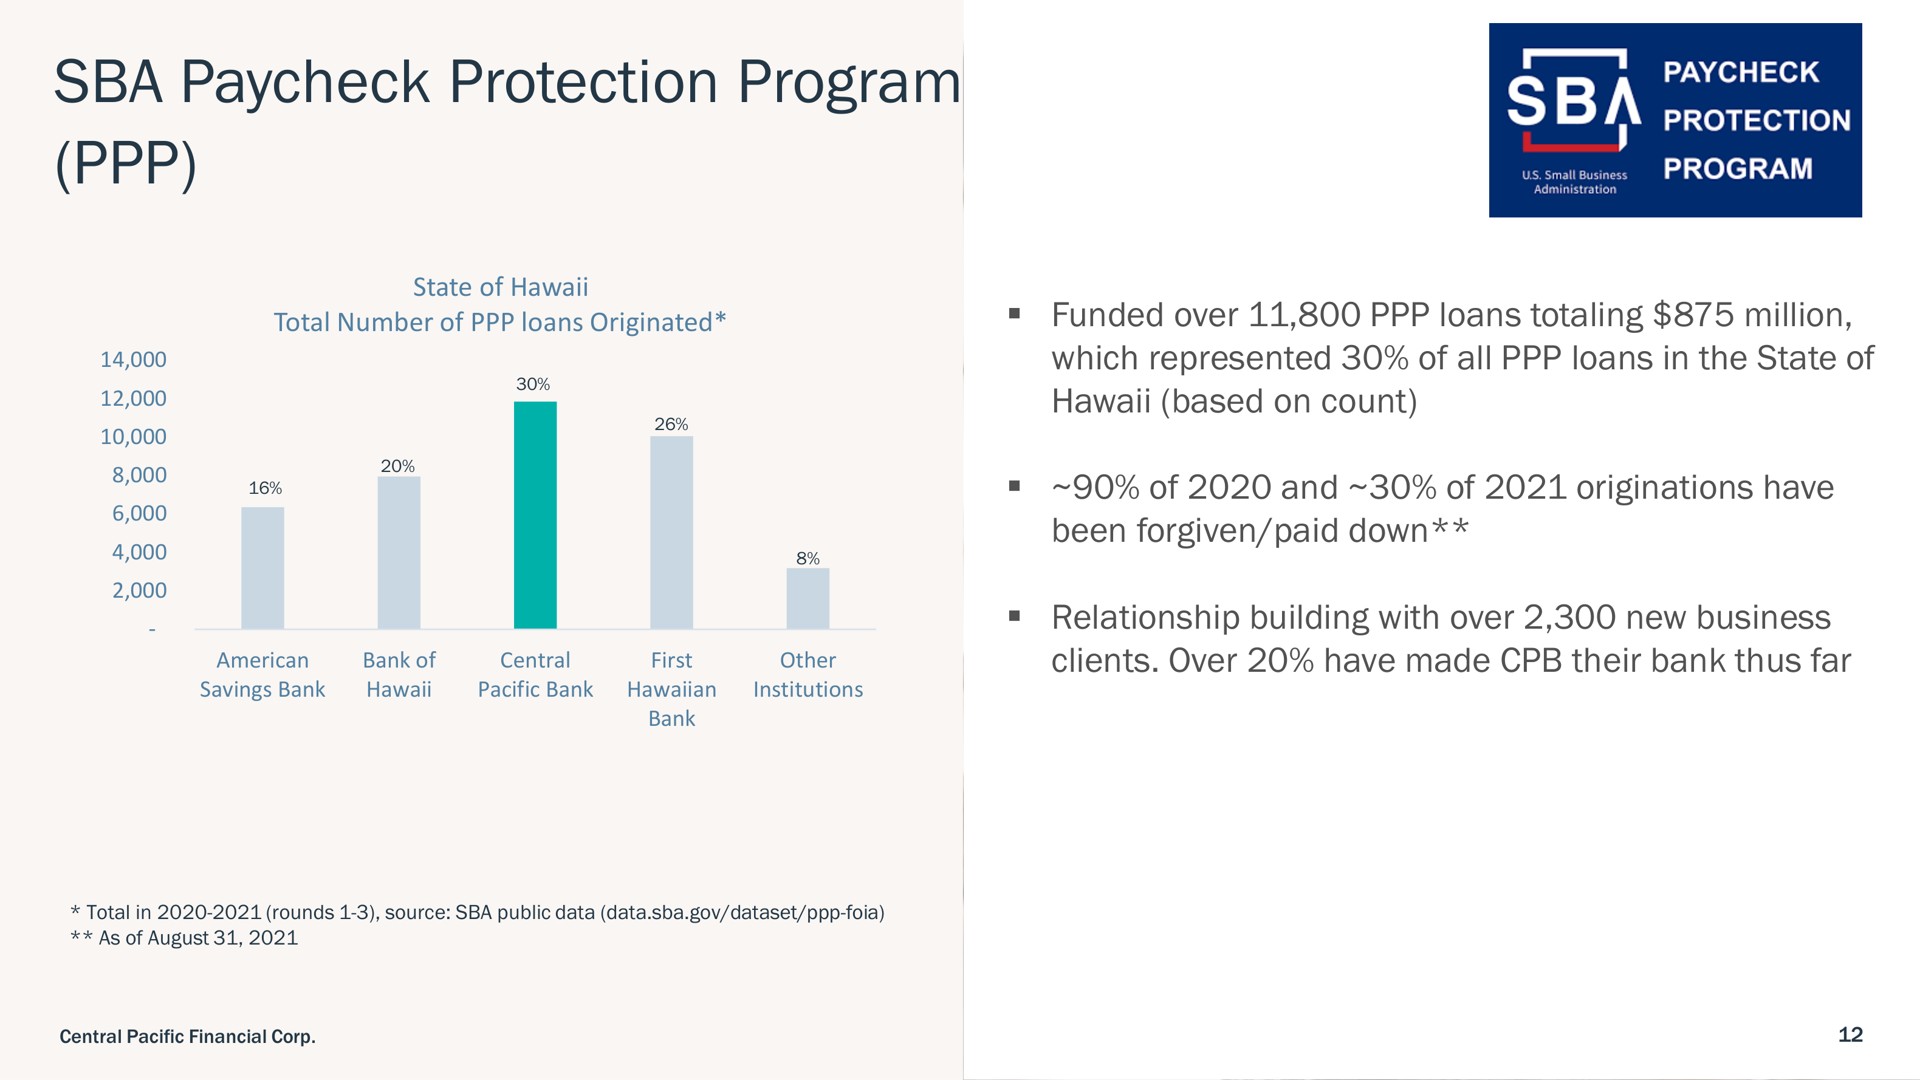 protection program of and of originations have | Central Pacific Financial